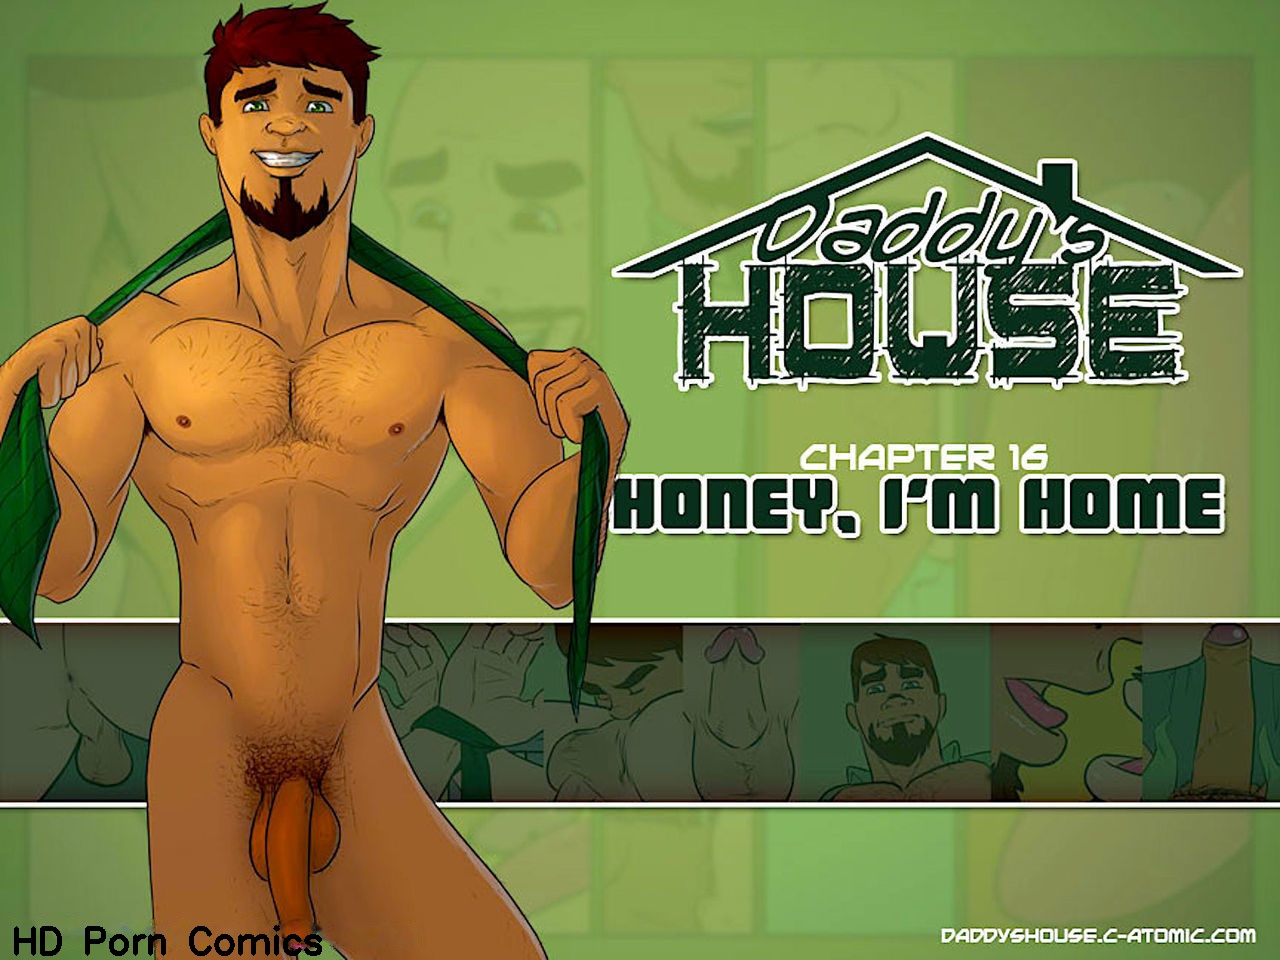 16honey Sex - Daddy's House Year 1 - Chapter 16 - Honey, I'm Home comic porn - HD Porn  Comics